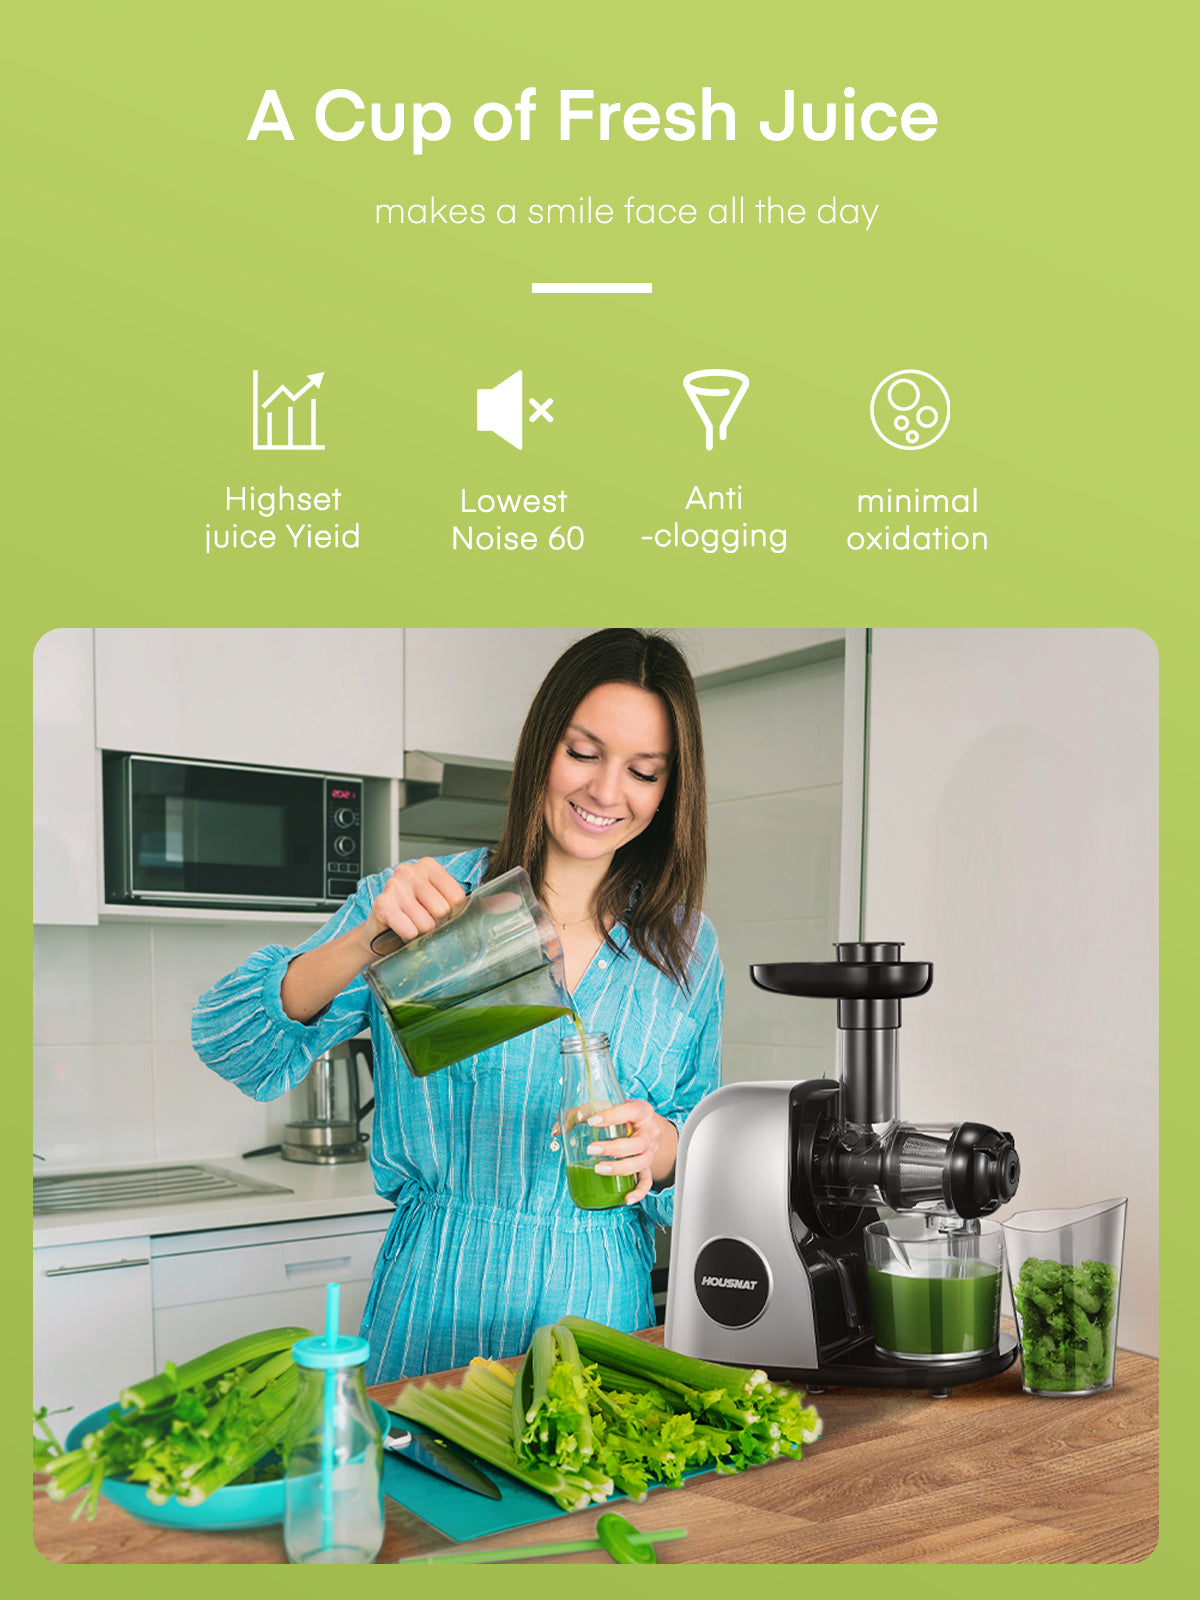 a cup of fresh juice, Juicer Machines, HOUSNAT Professional Celery Slow Masticating Juicer Extractor Easy to Clean, Cold Press Juicer with Quiet Motor and Reverse Function for Fruit & Vegetable, Brushes & Recipes Included, Grey